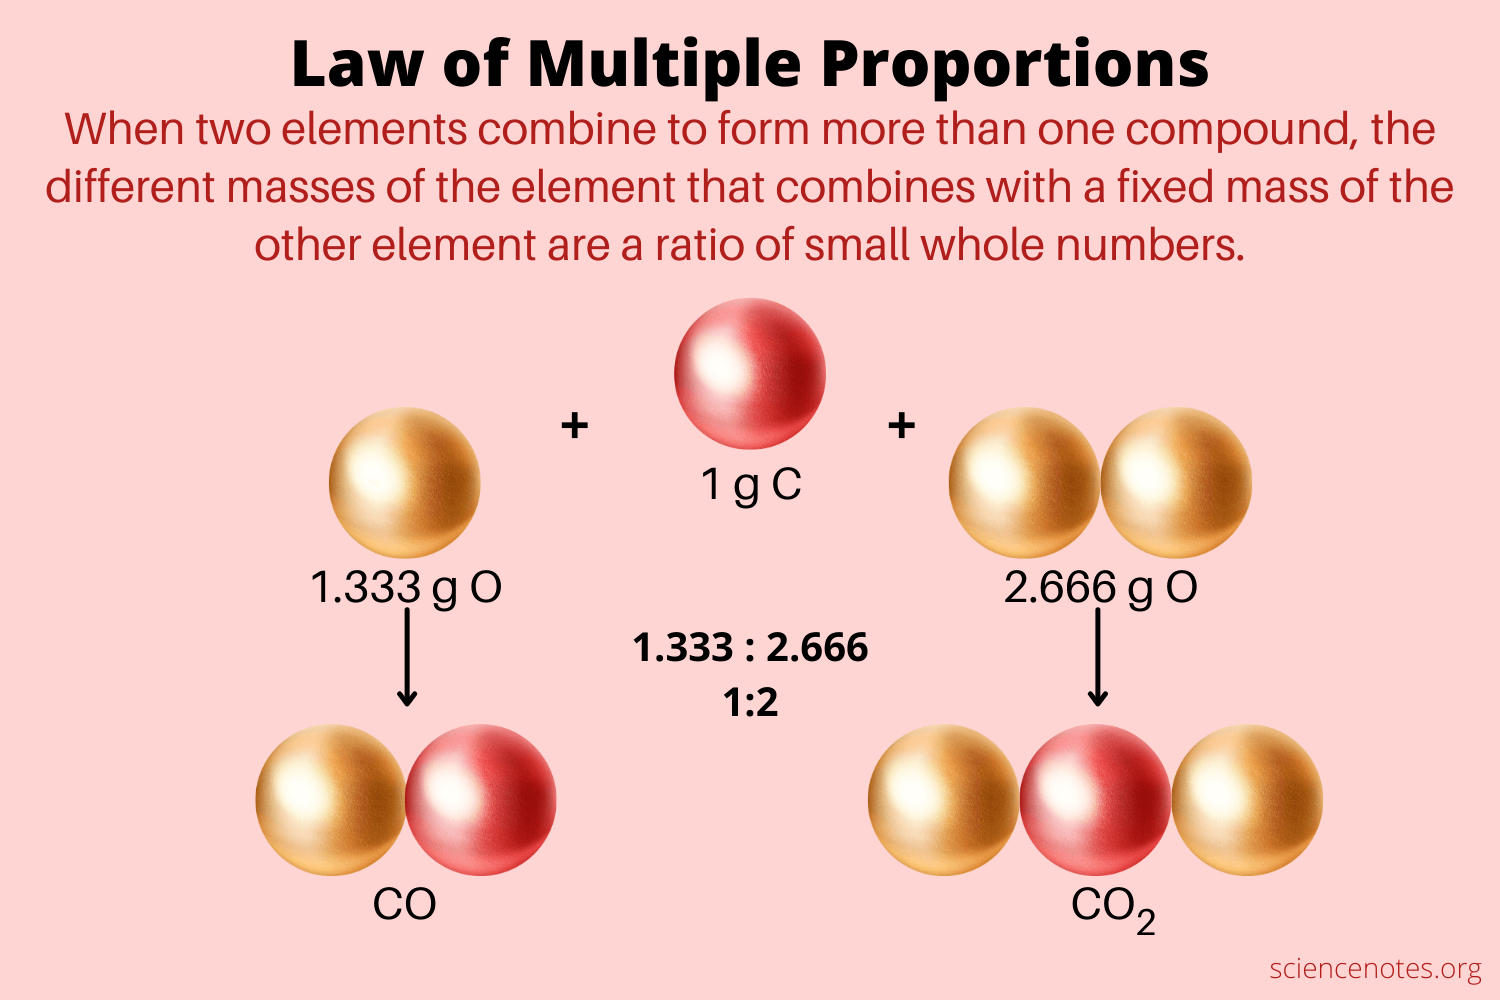 state the law of multiple proportions.